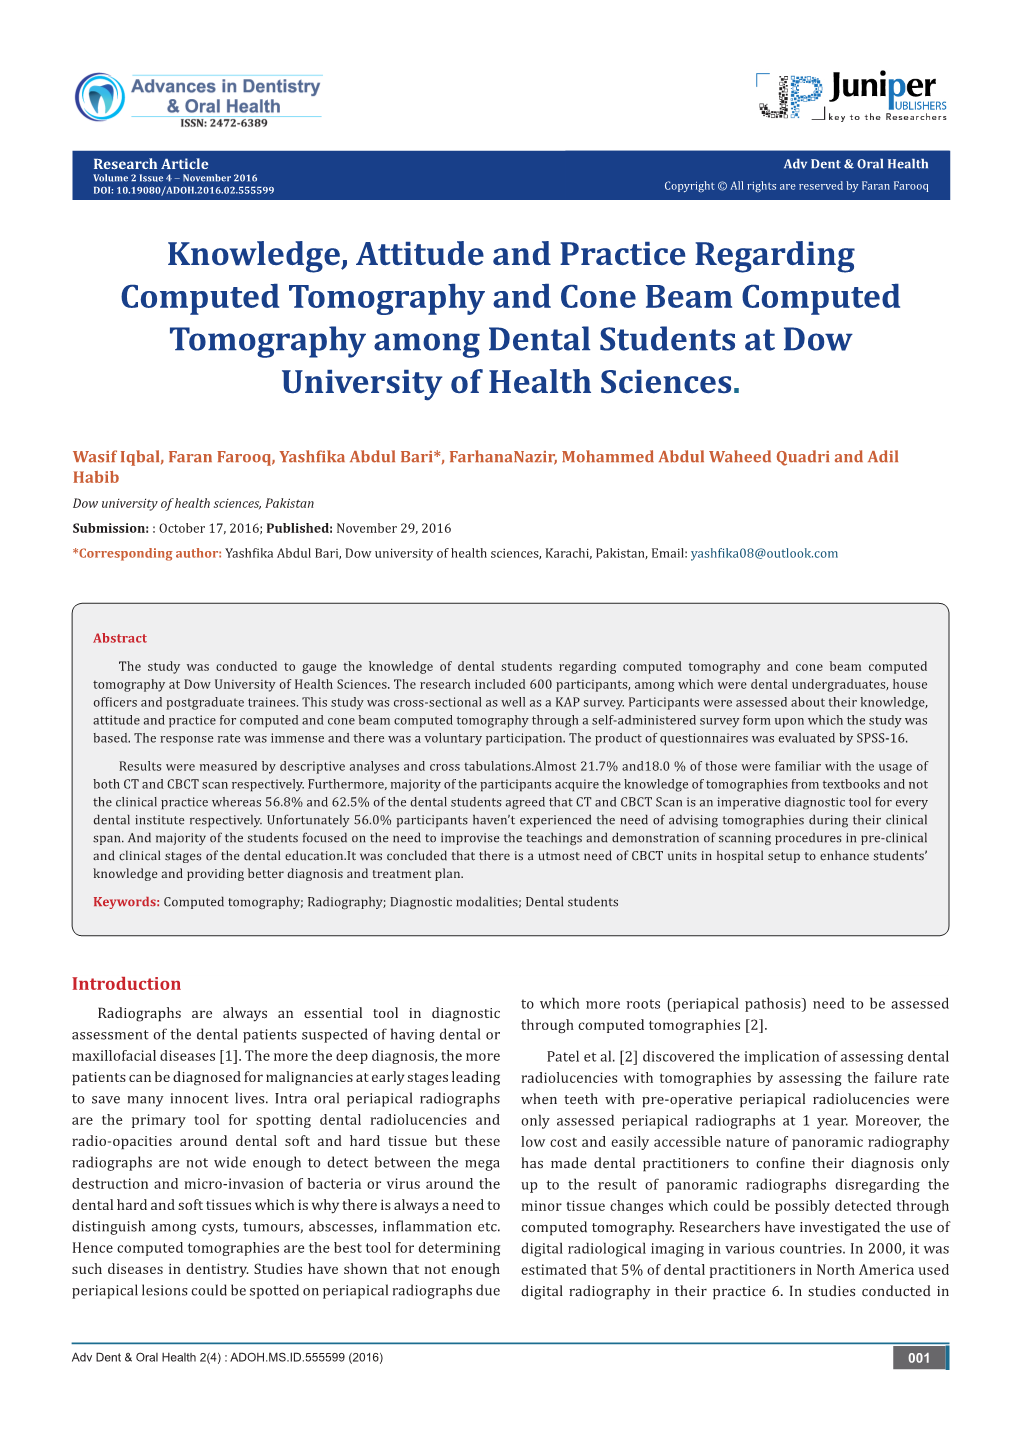 Knowledge, Attitude and Practice Regarding Computed Tomography and Cone Beam Computed Tomography Among Dental Students at Dow University of Health Sciences